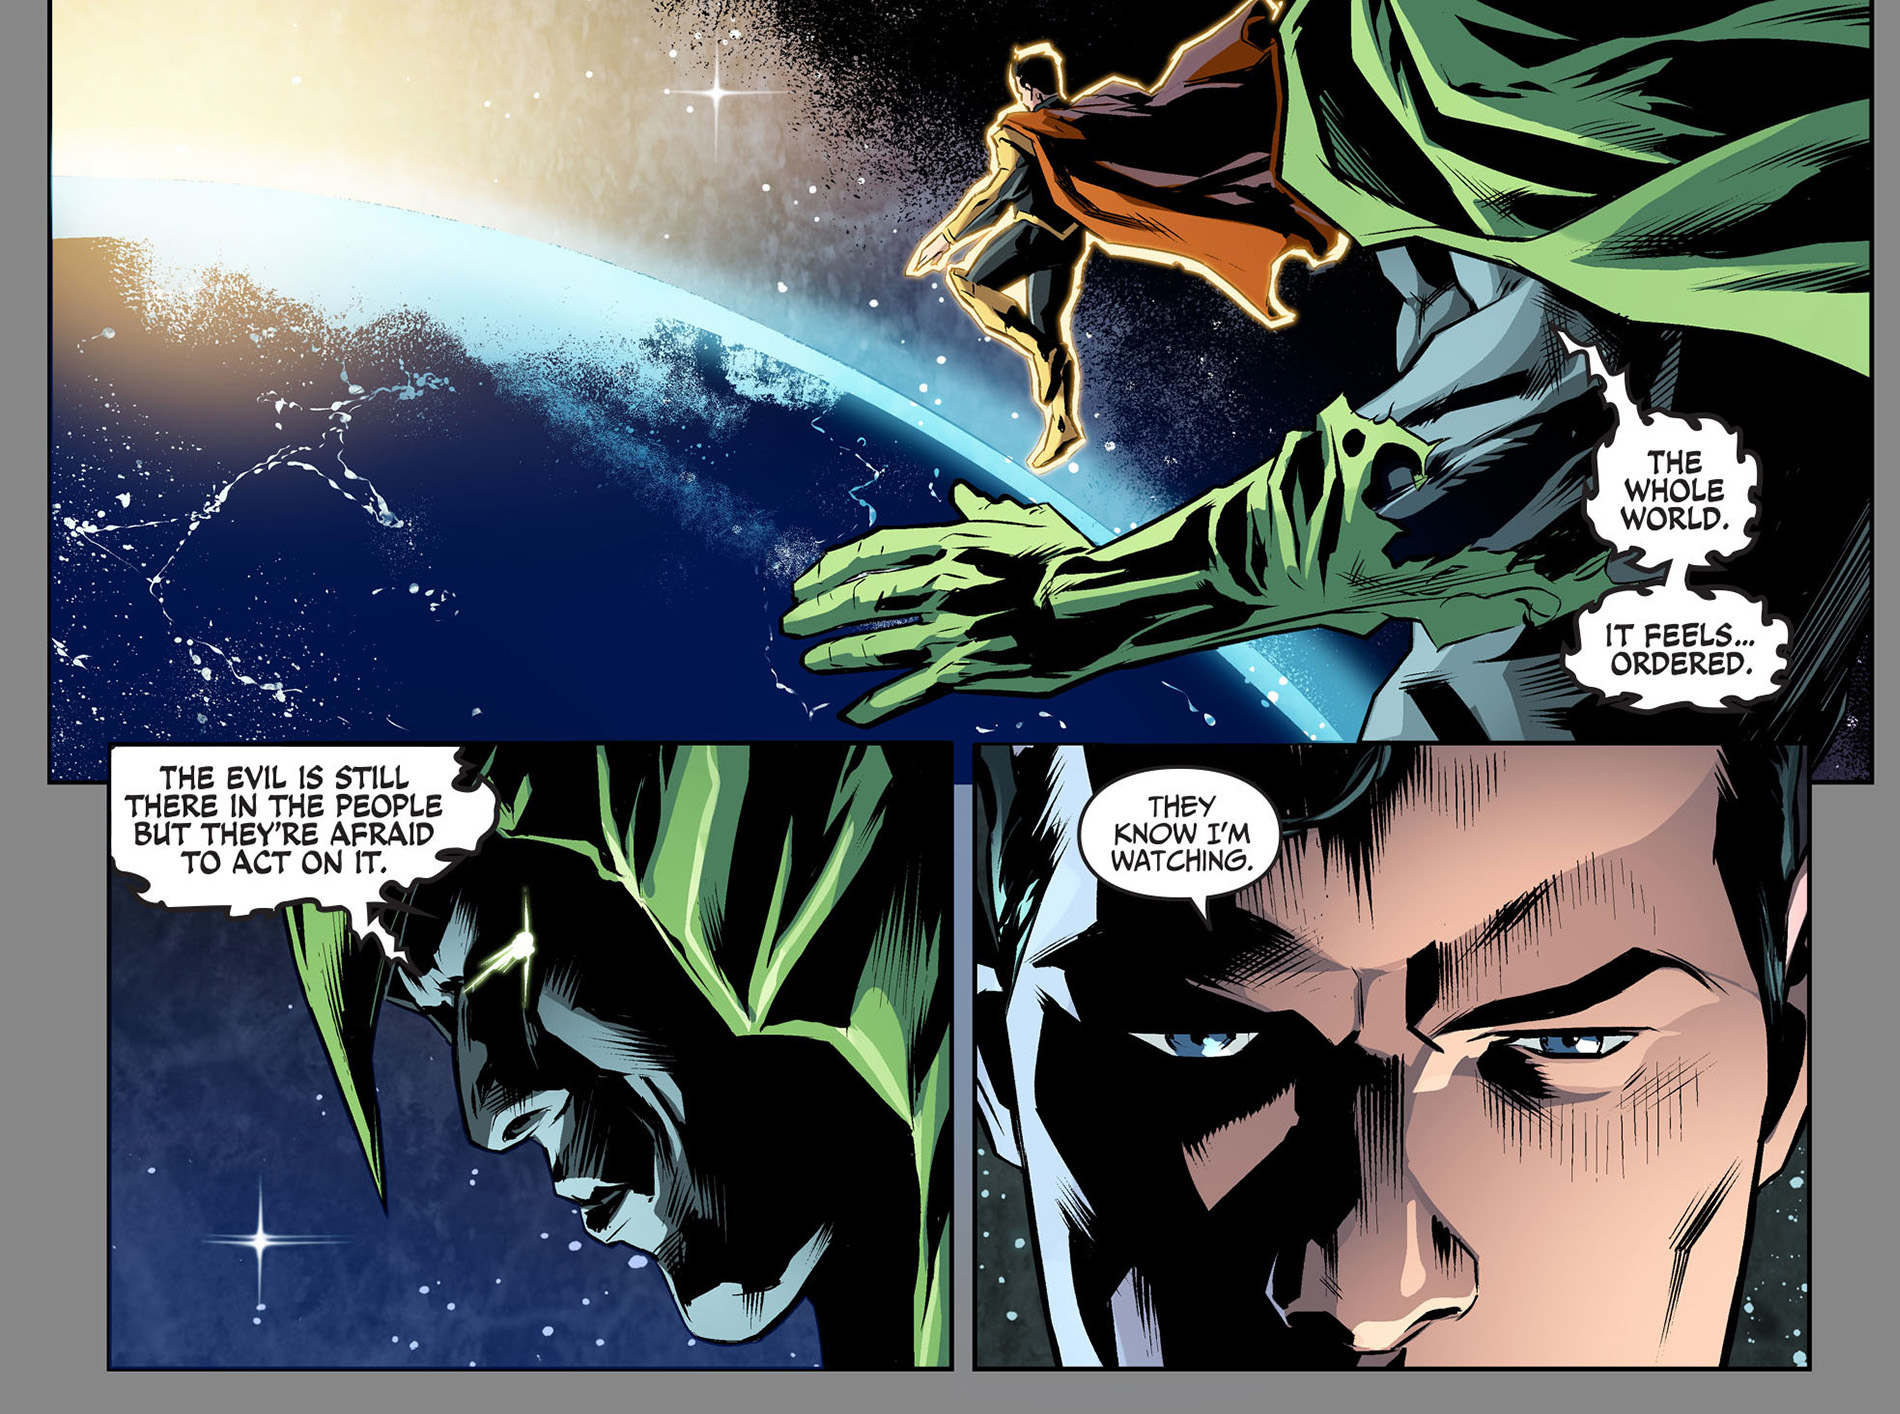 the spectre approves of superman